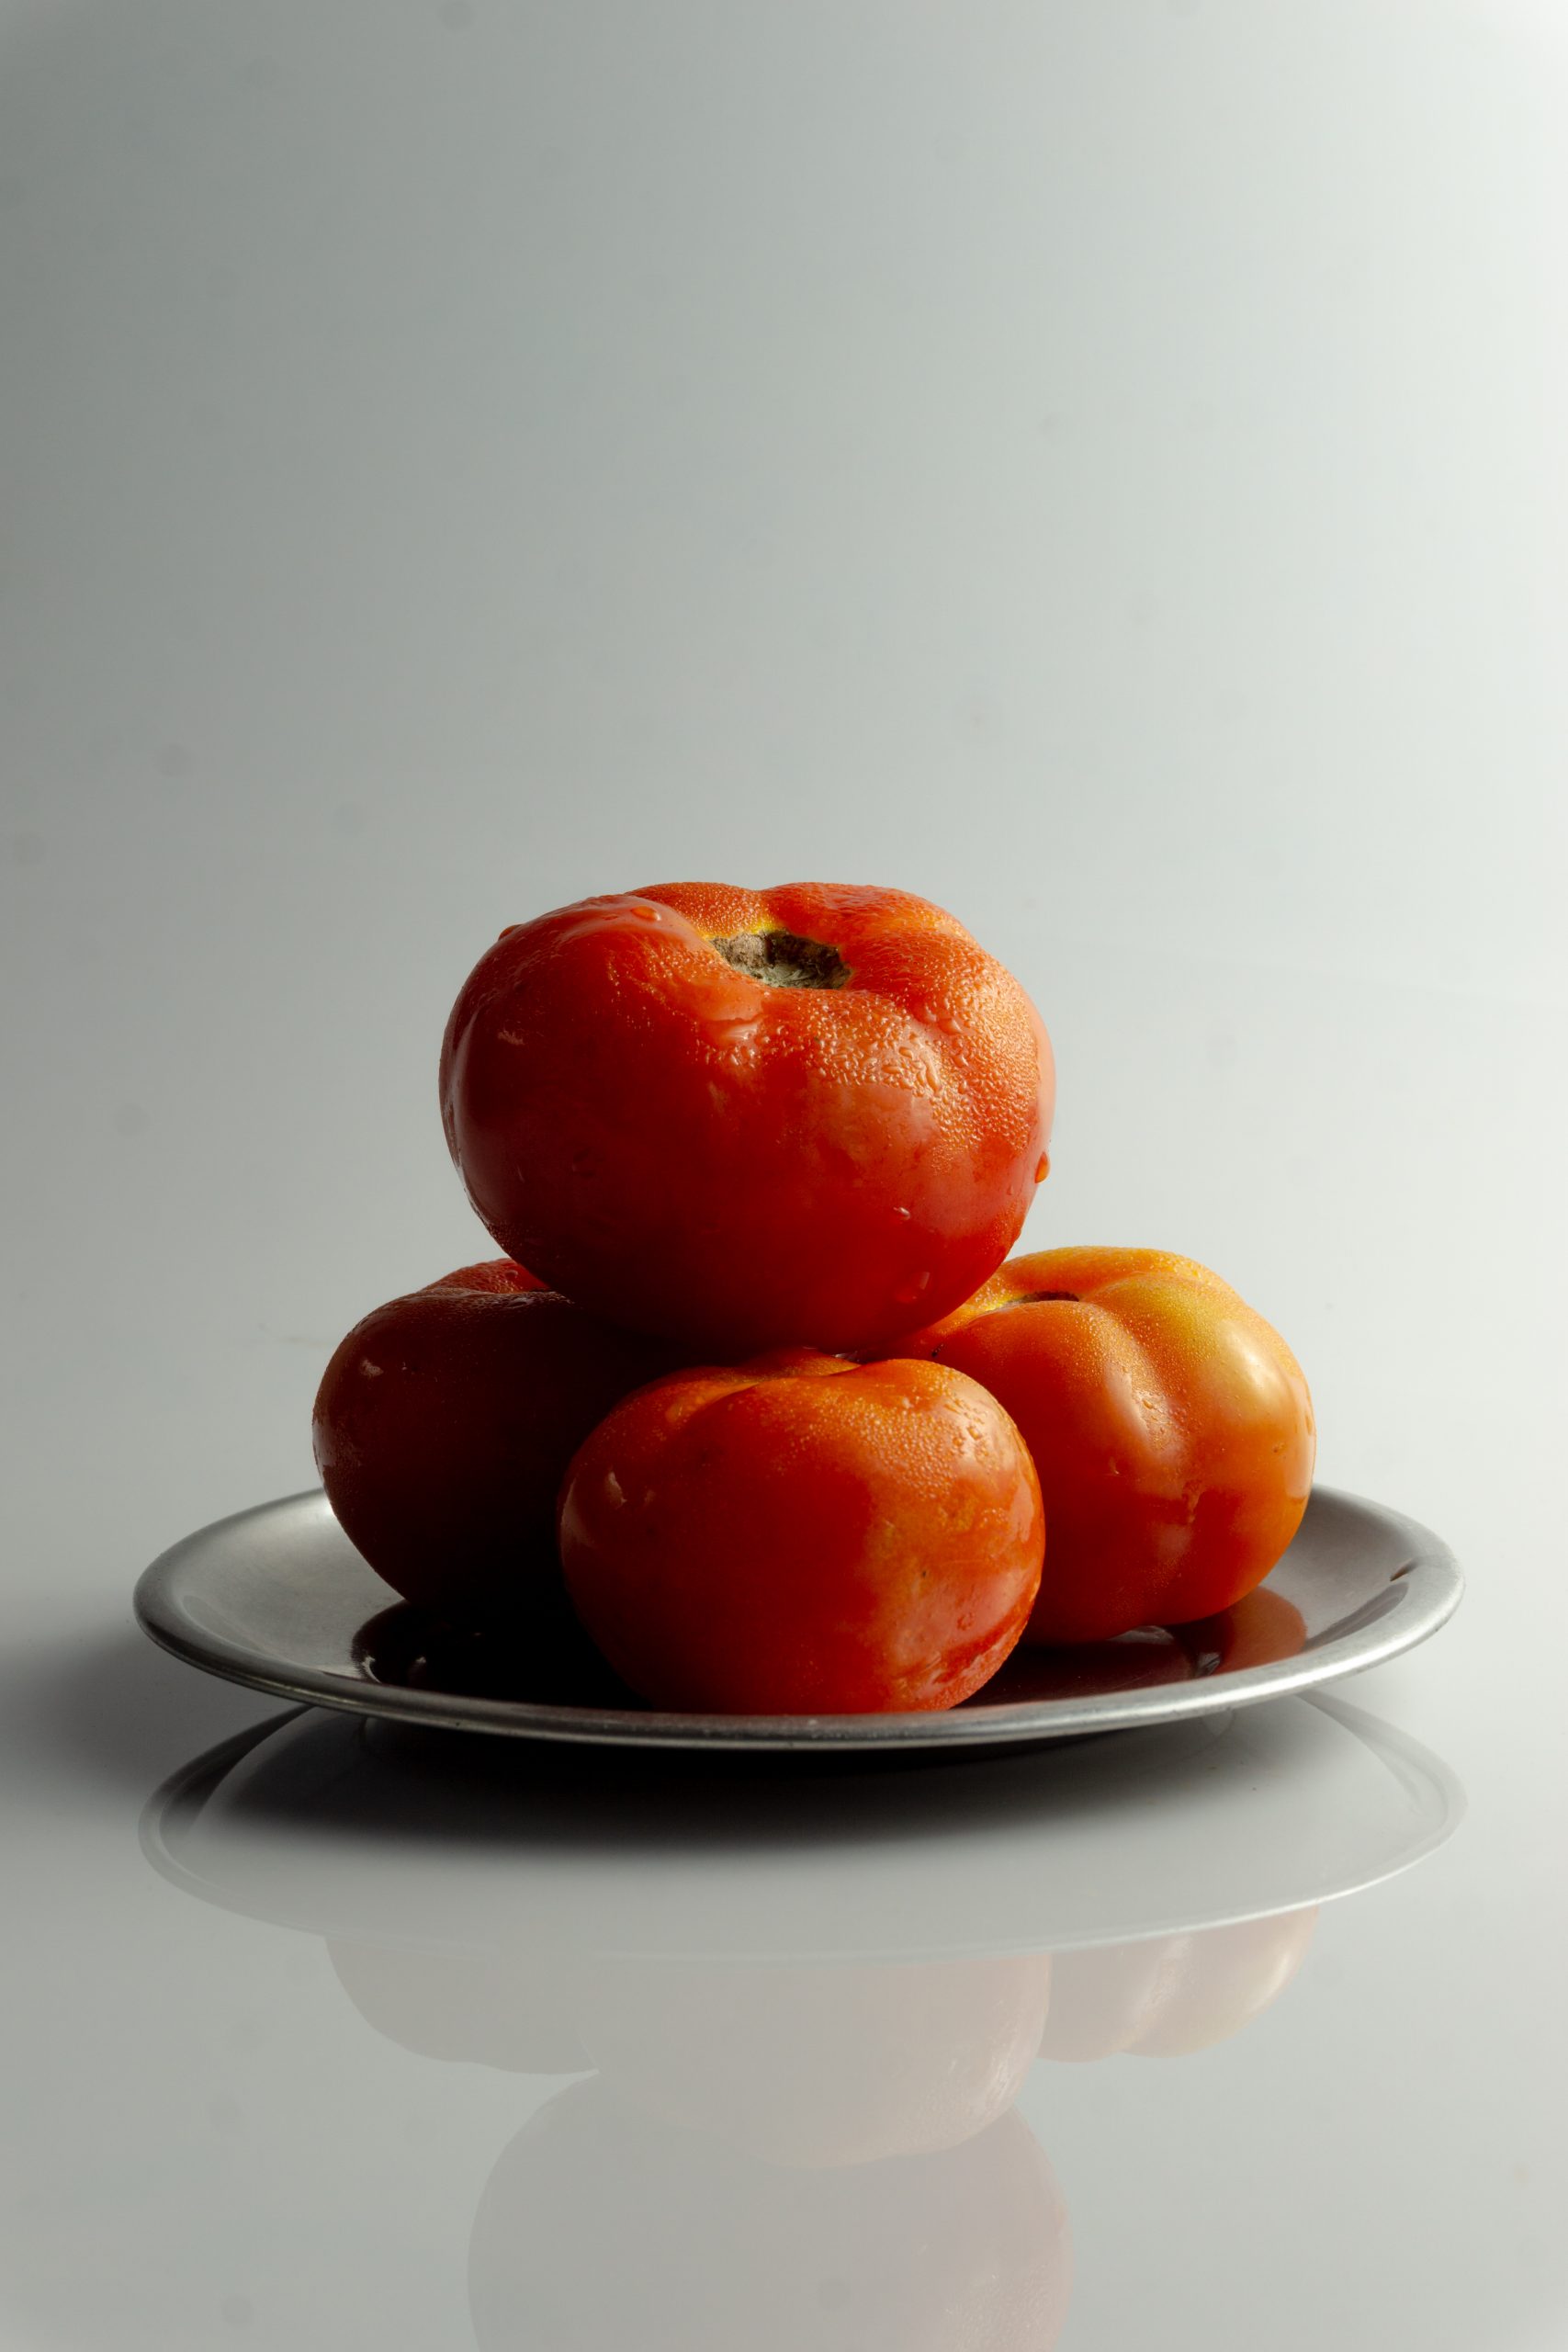 Tomatoes in a plate